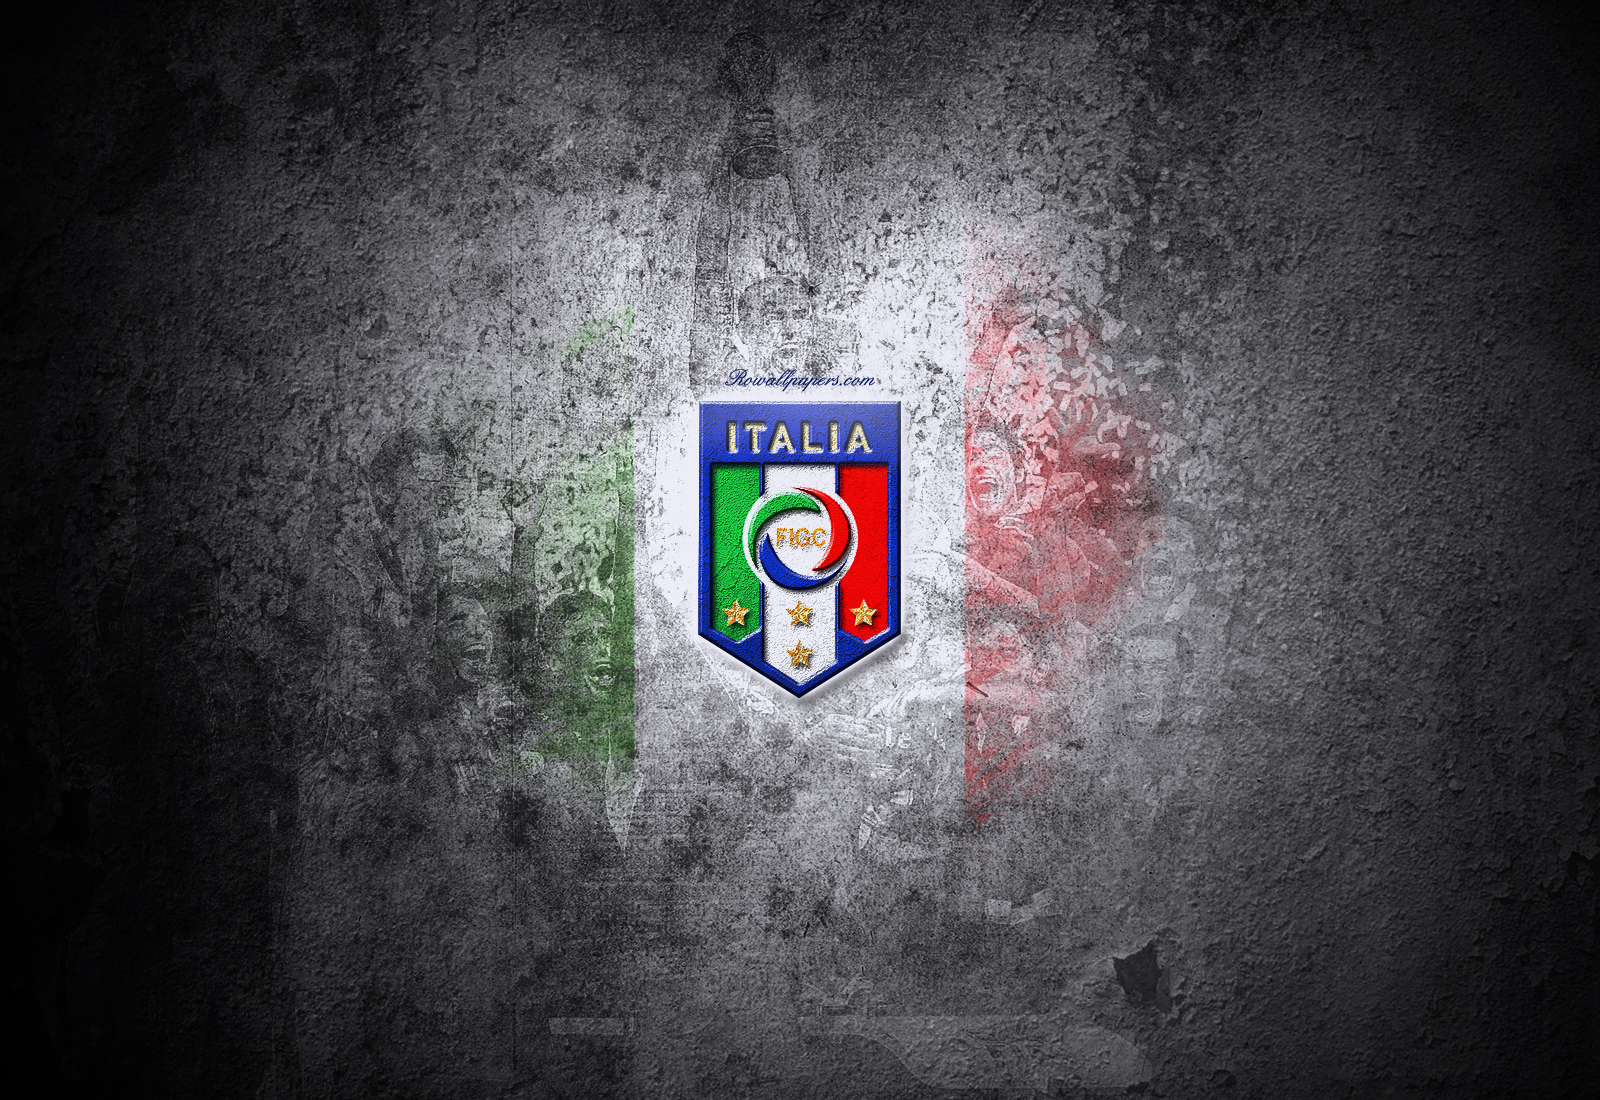 Italy National Football Team Wallpapers   HD Wallpapers 1600x1100